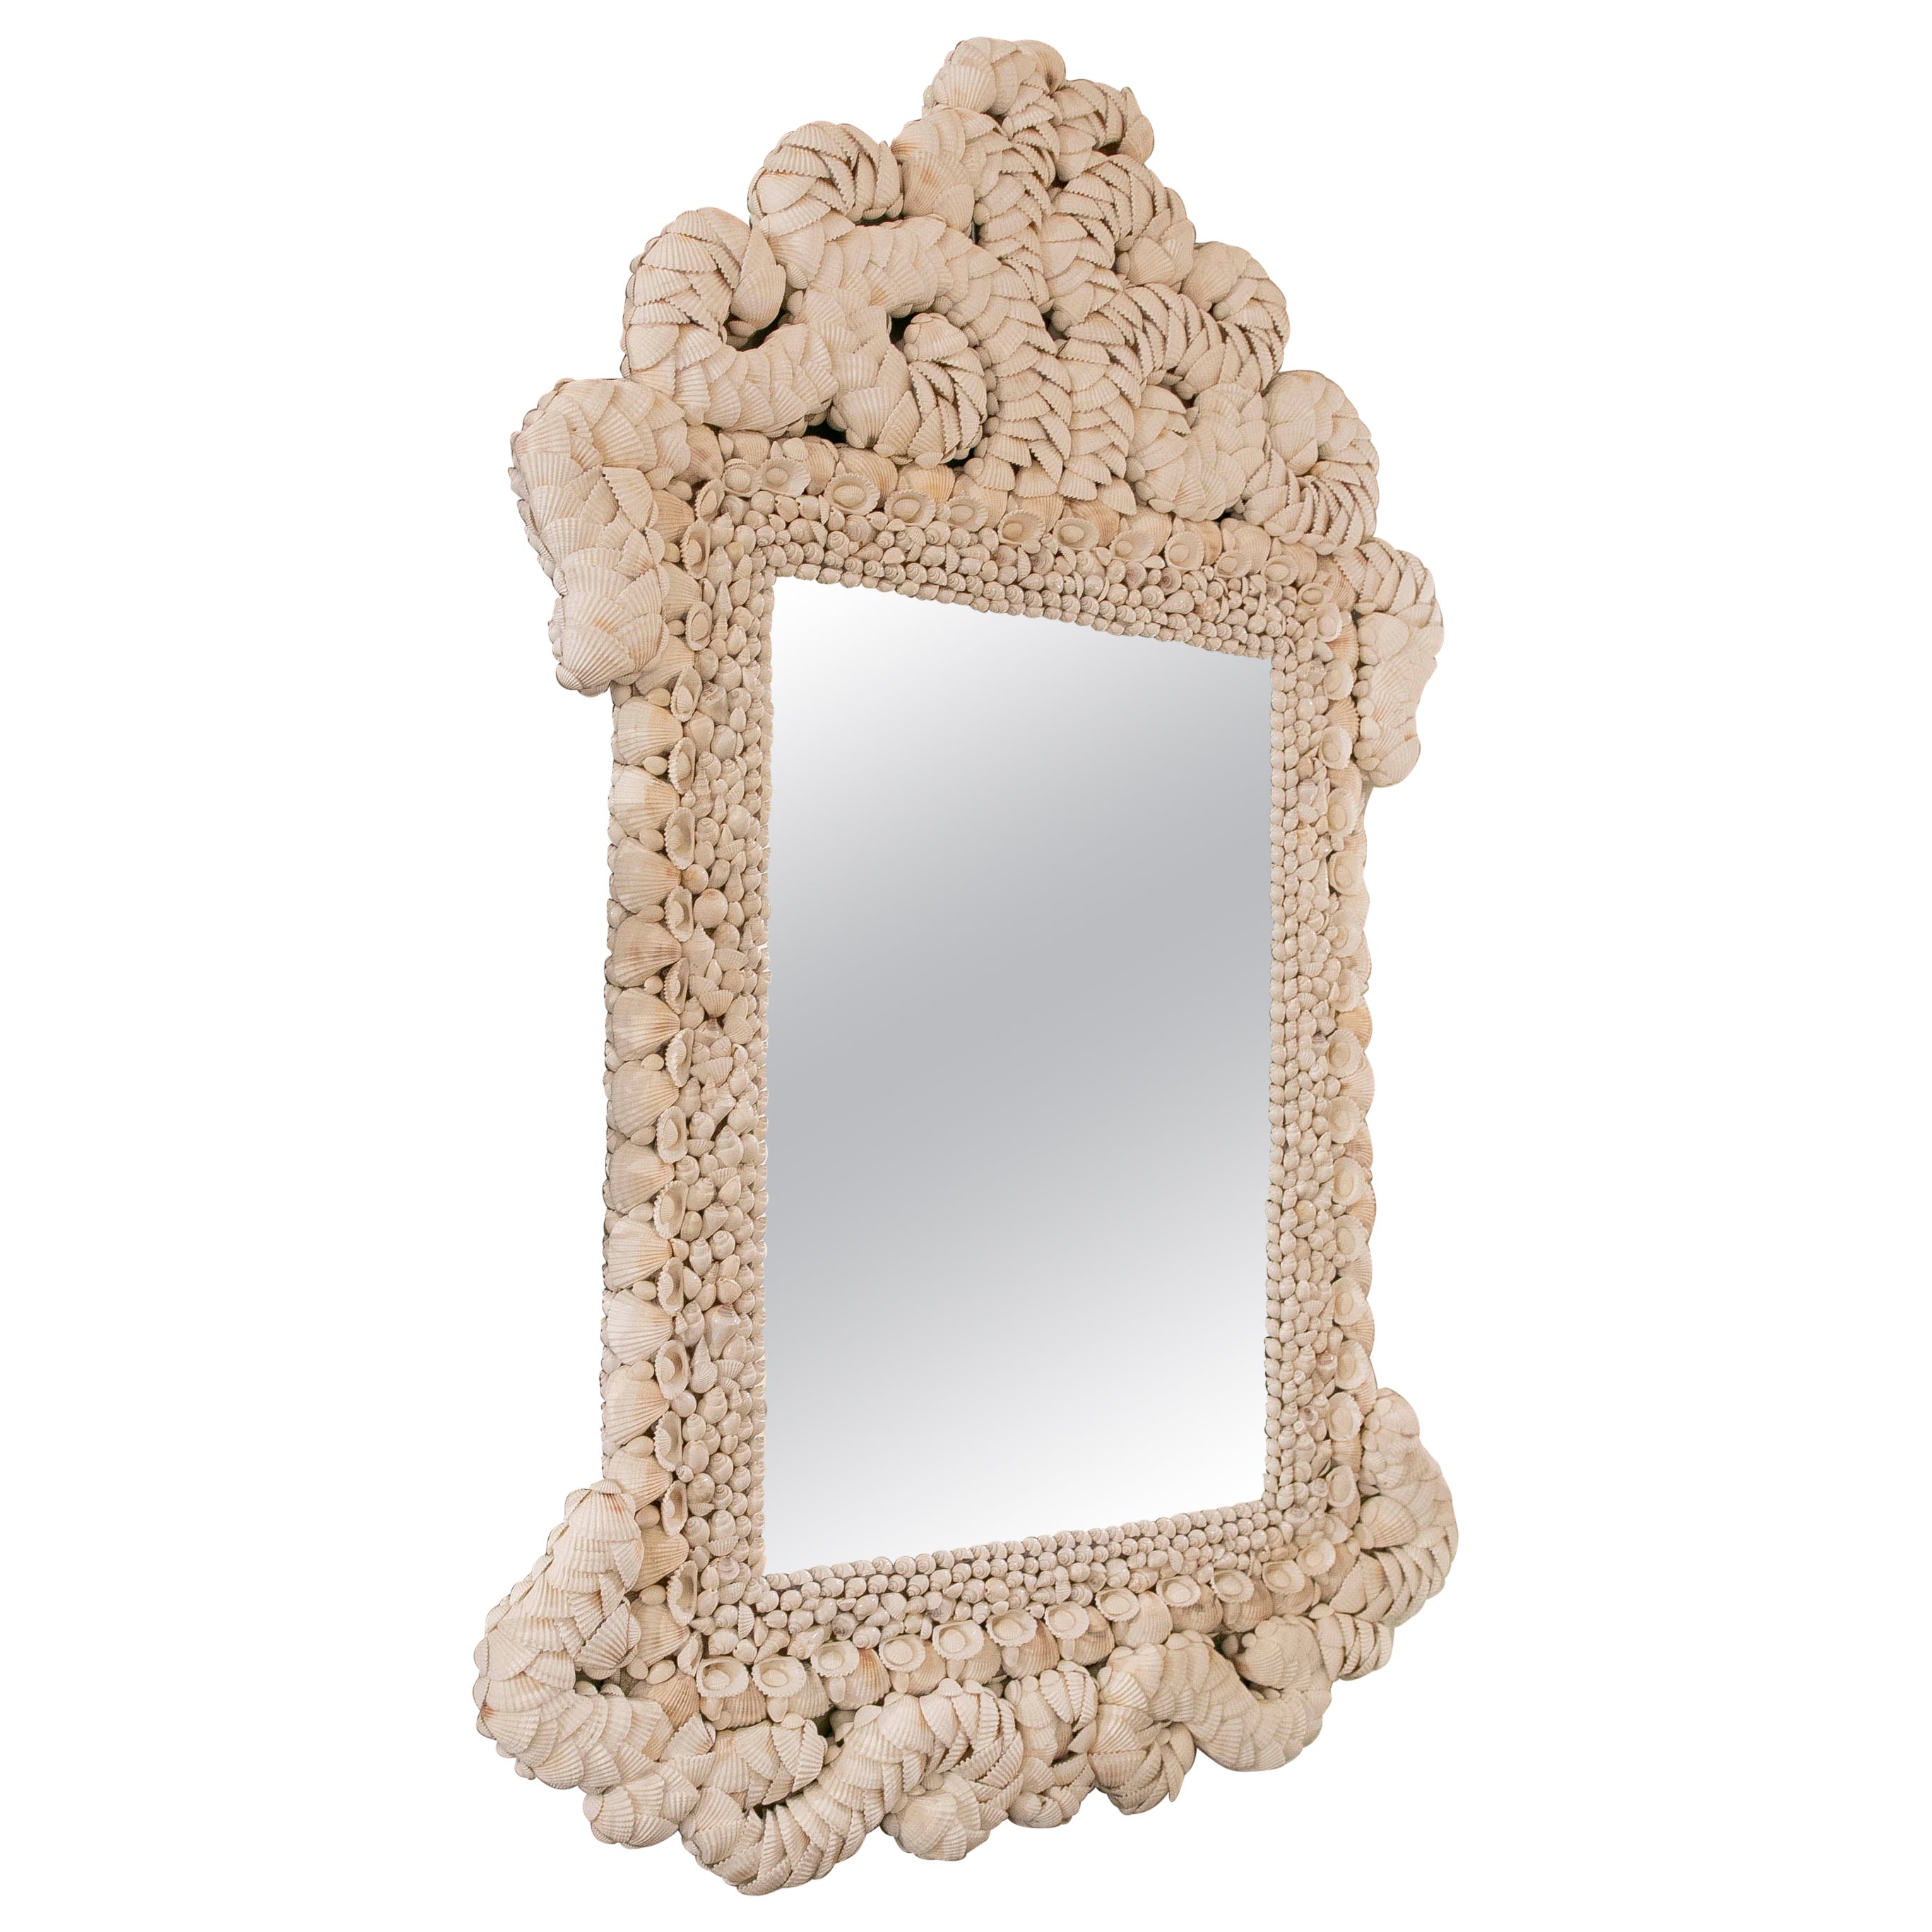 Wall Mirror with Top Made of Seashells and Conch Shells